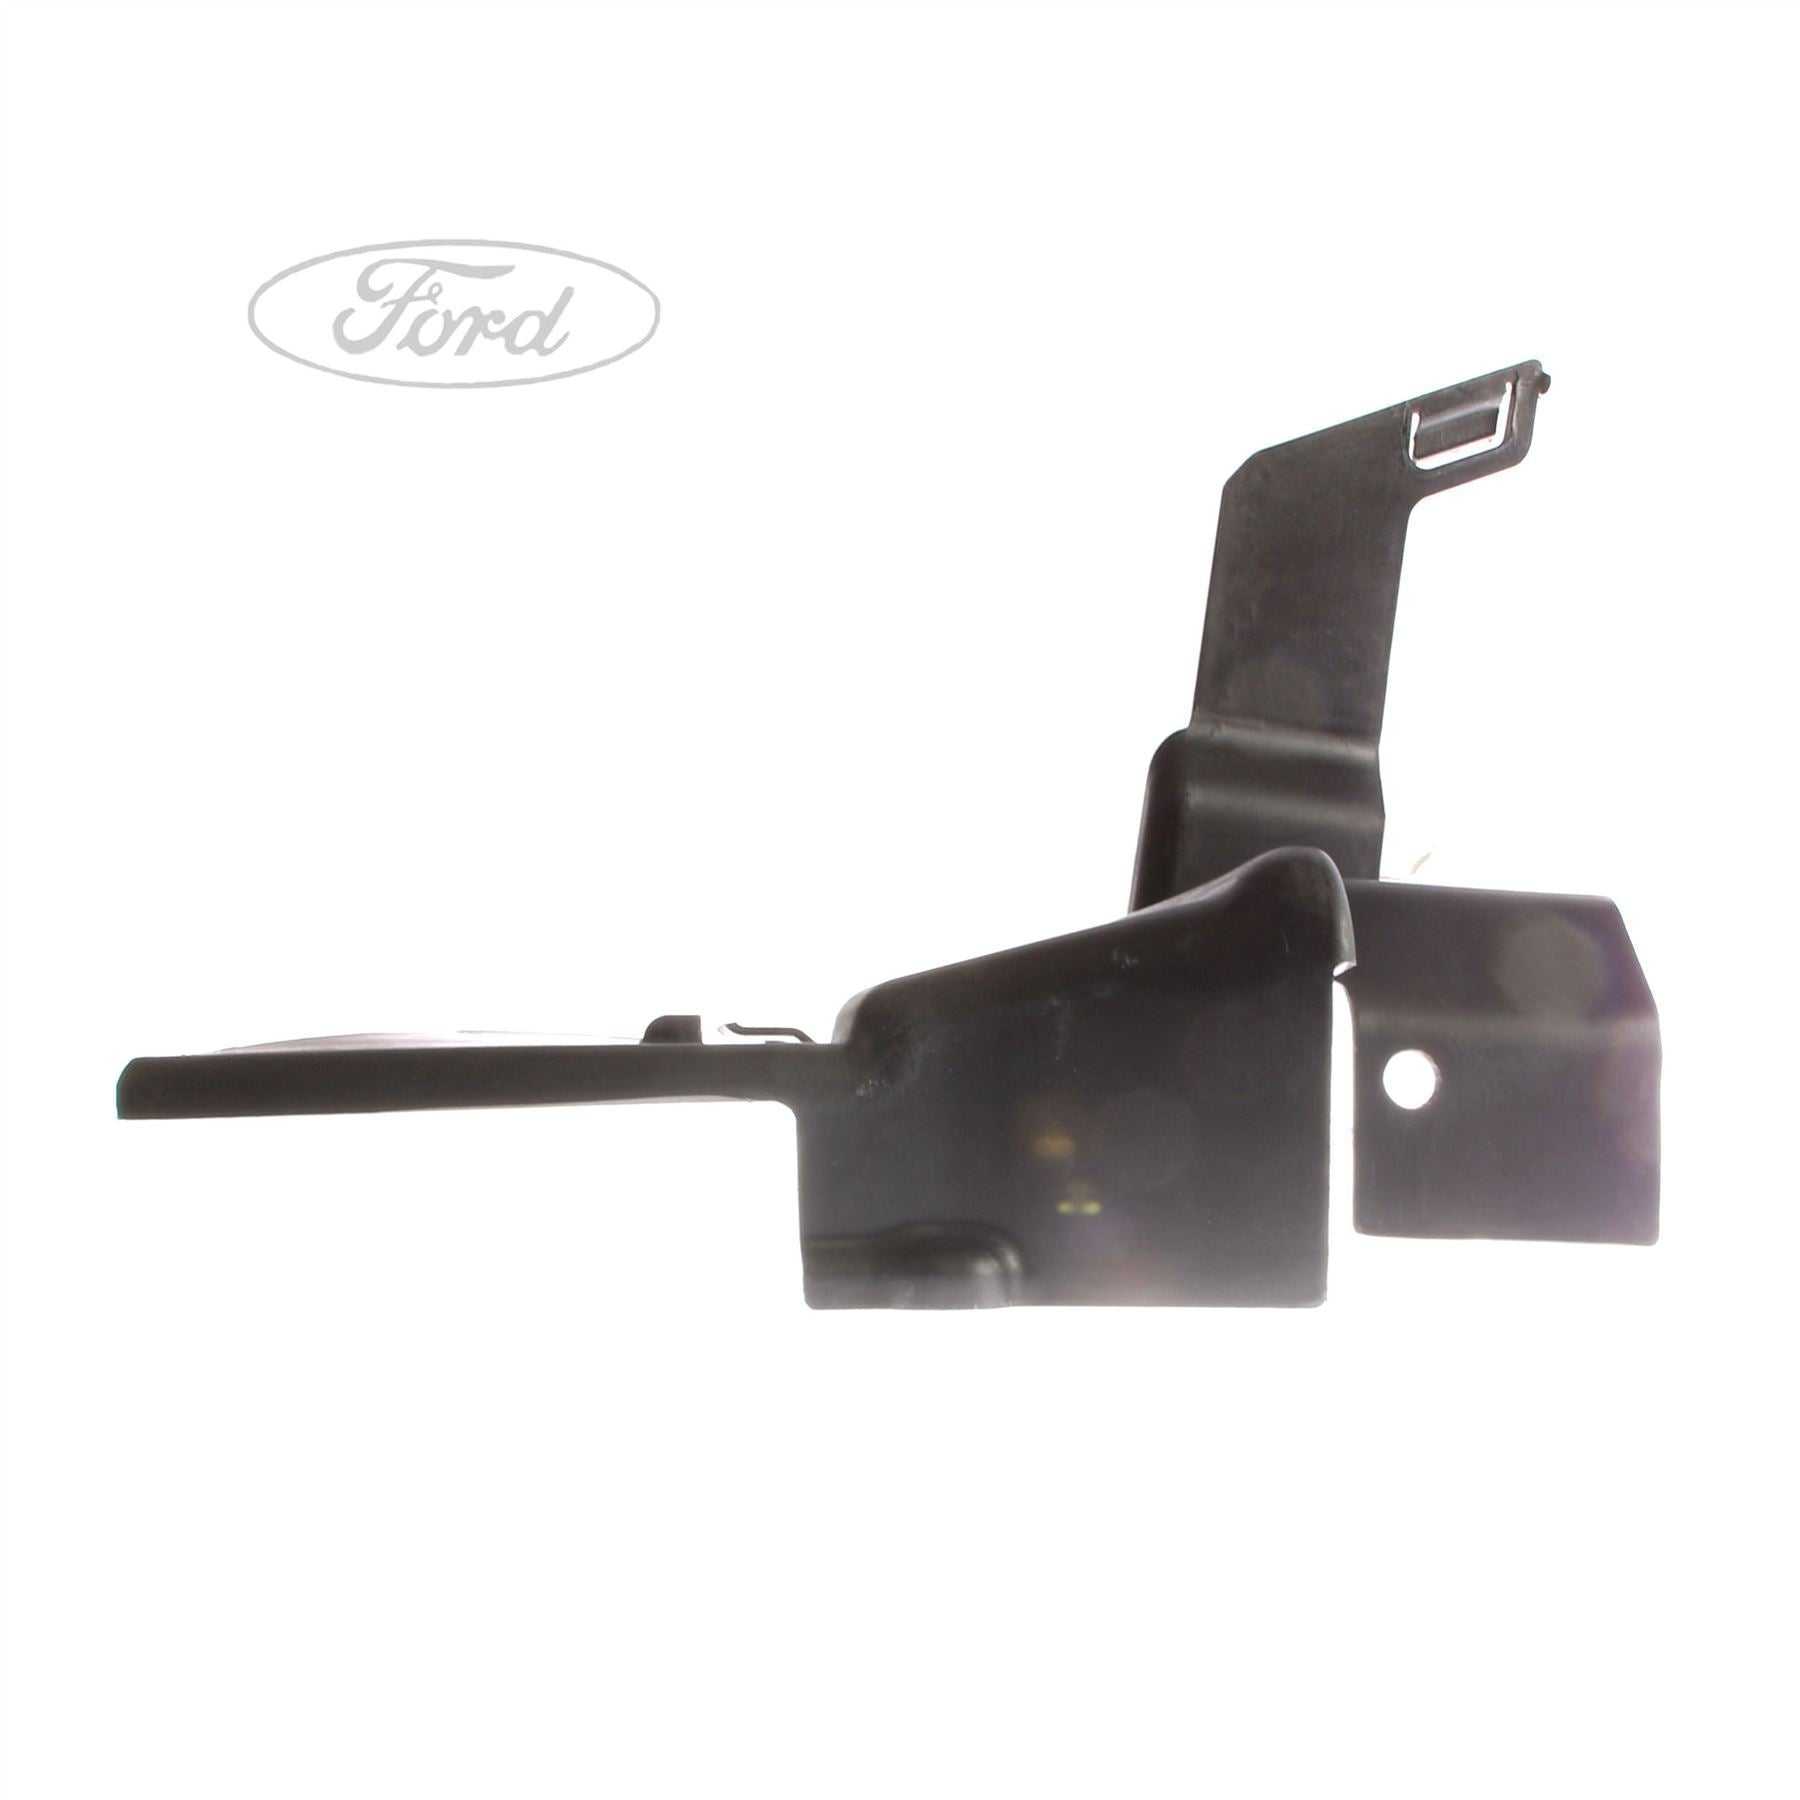 Ford, TRANSIT FRONT WHEEL ARCH TRIM